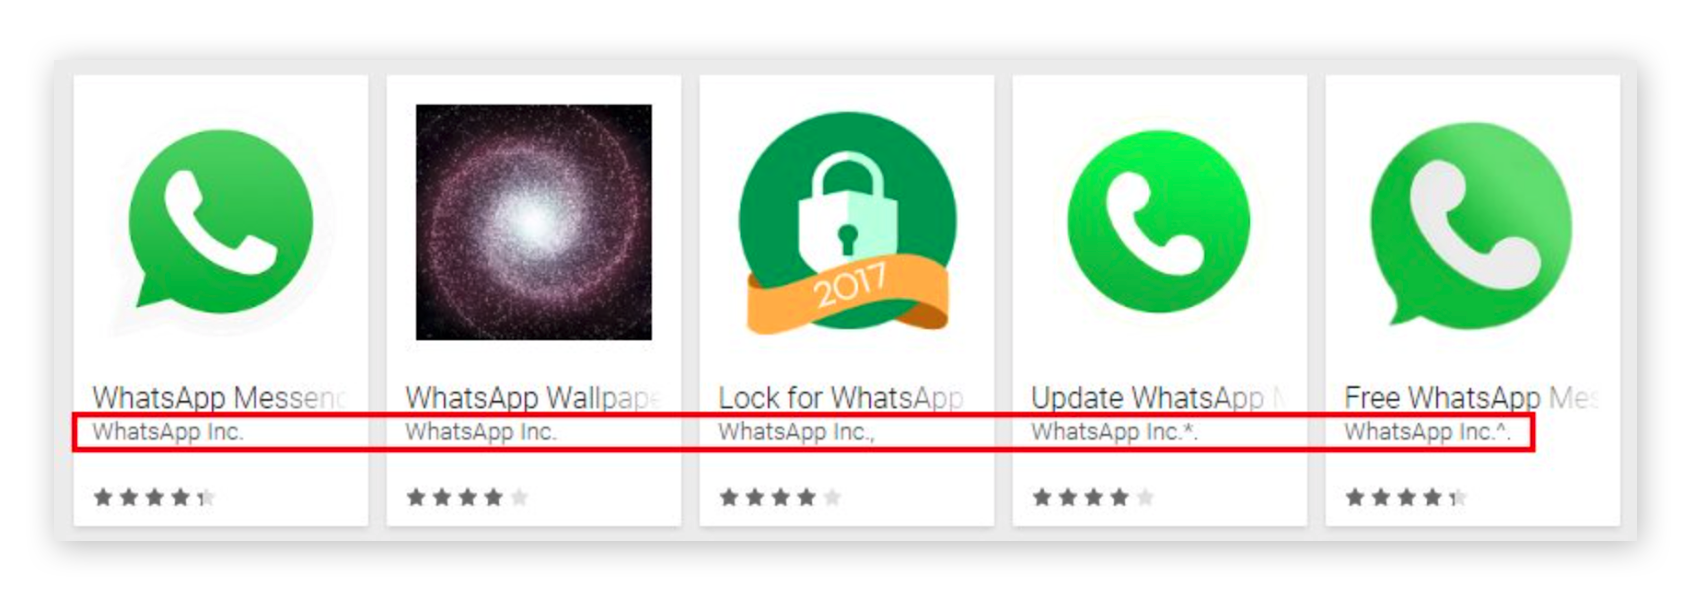 Fake Apps How To Spot Imposters Before Its Too Late Avast 3133